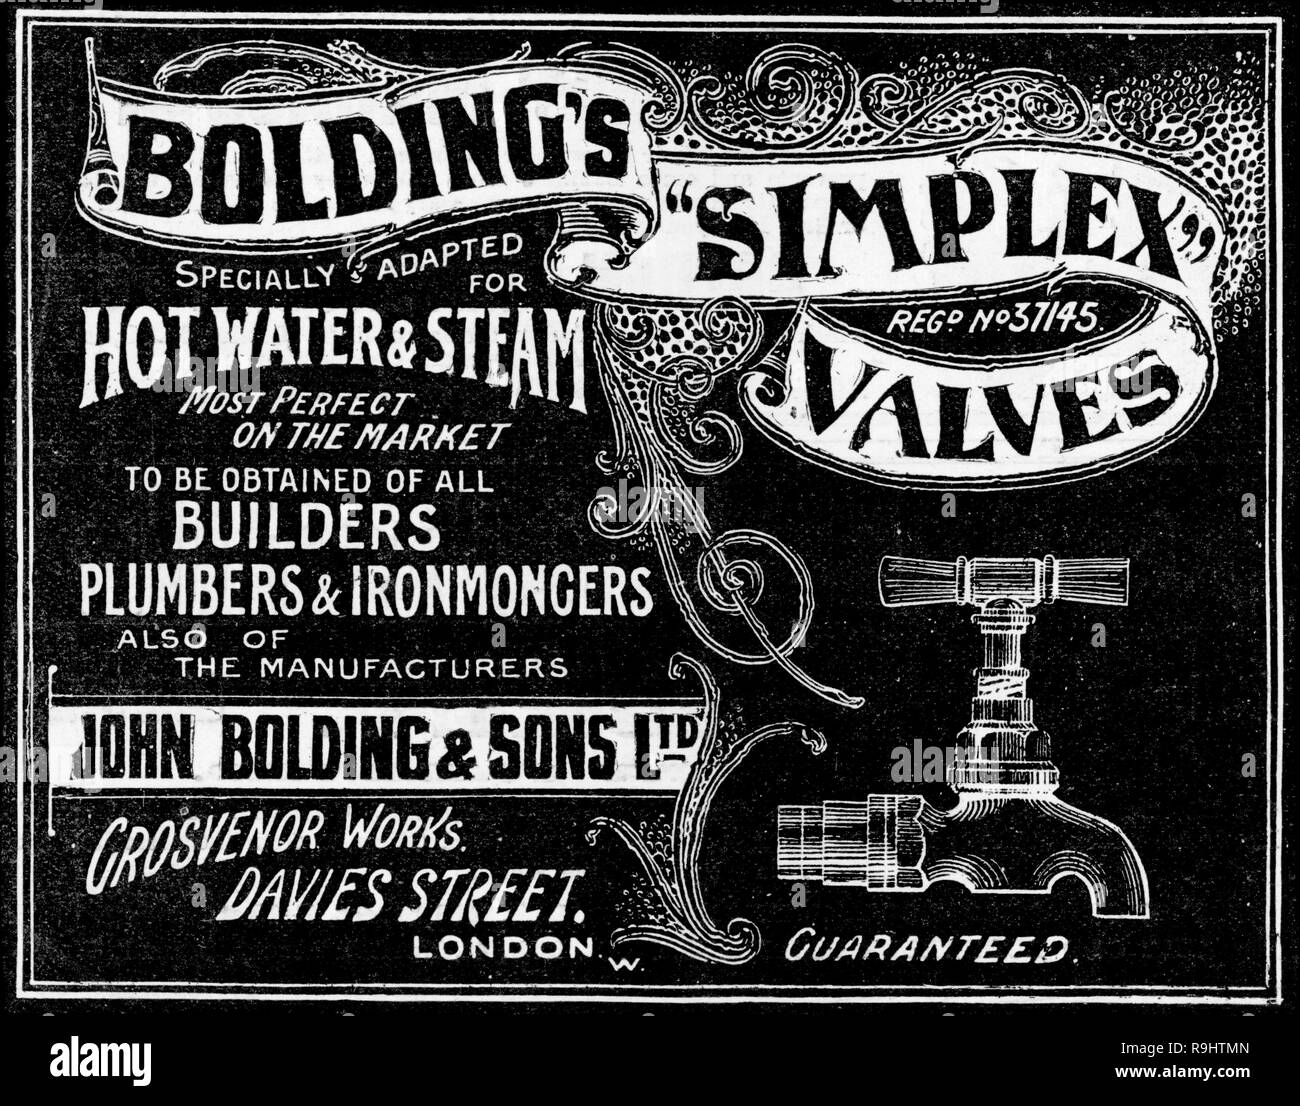 newspaper advert for Bolding's Simplex Valves from Illustrated London News from 1887 Stock Photo